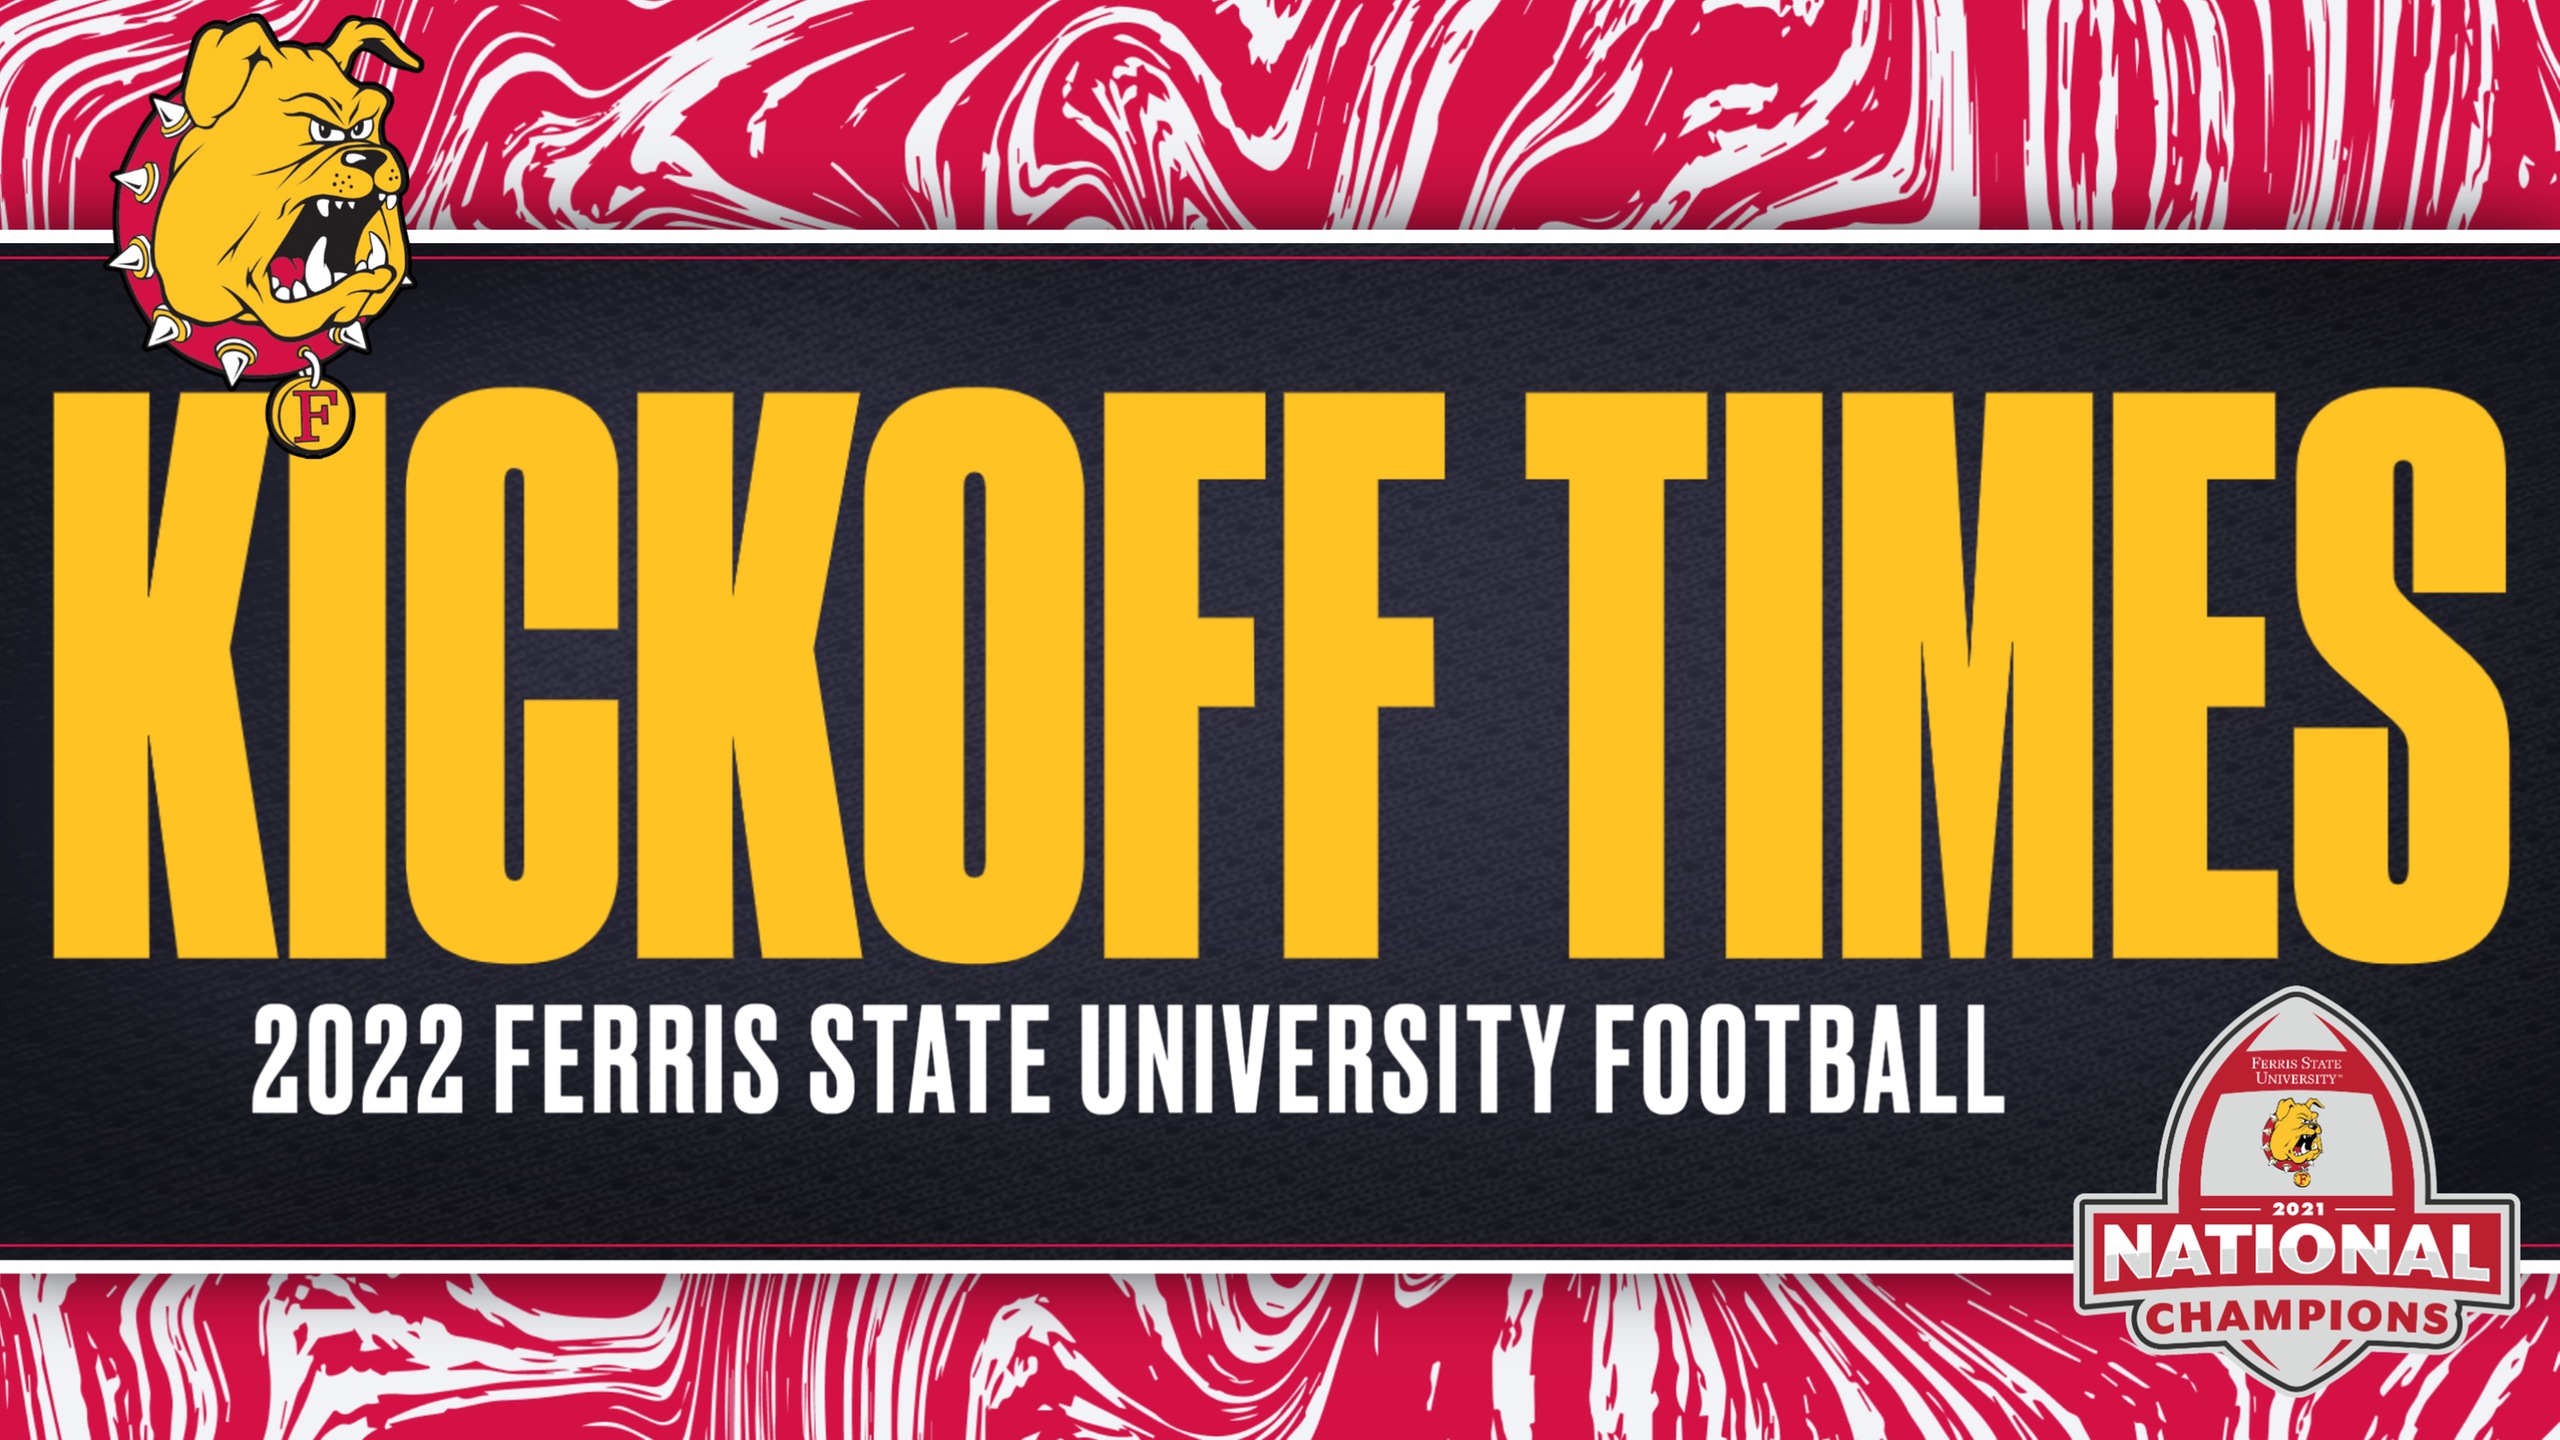 Official Kickoff Times Set For 2022 Ferris State Football National Championship Title Defense